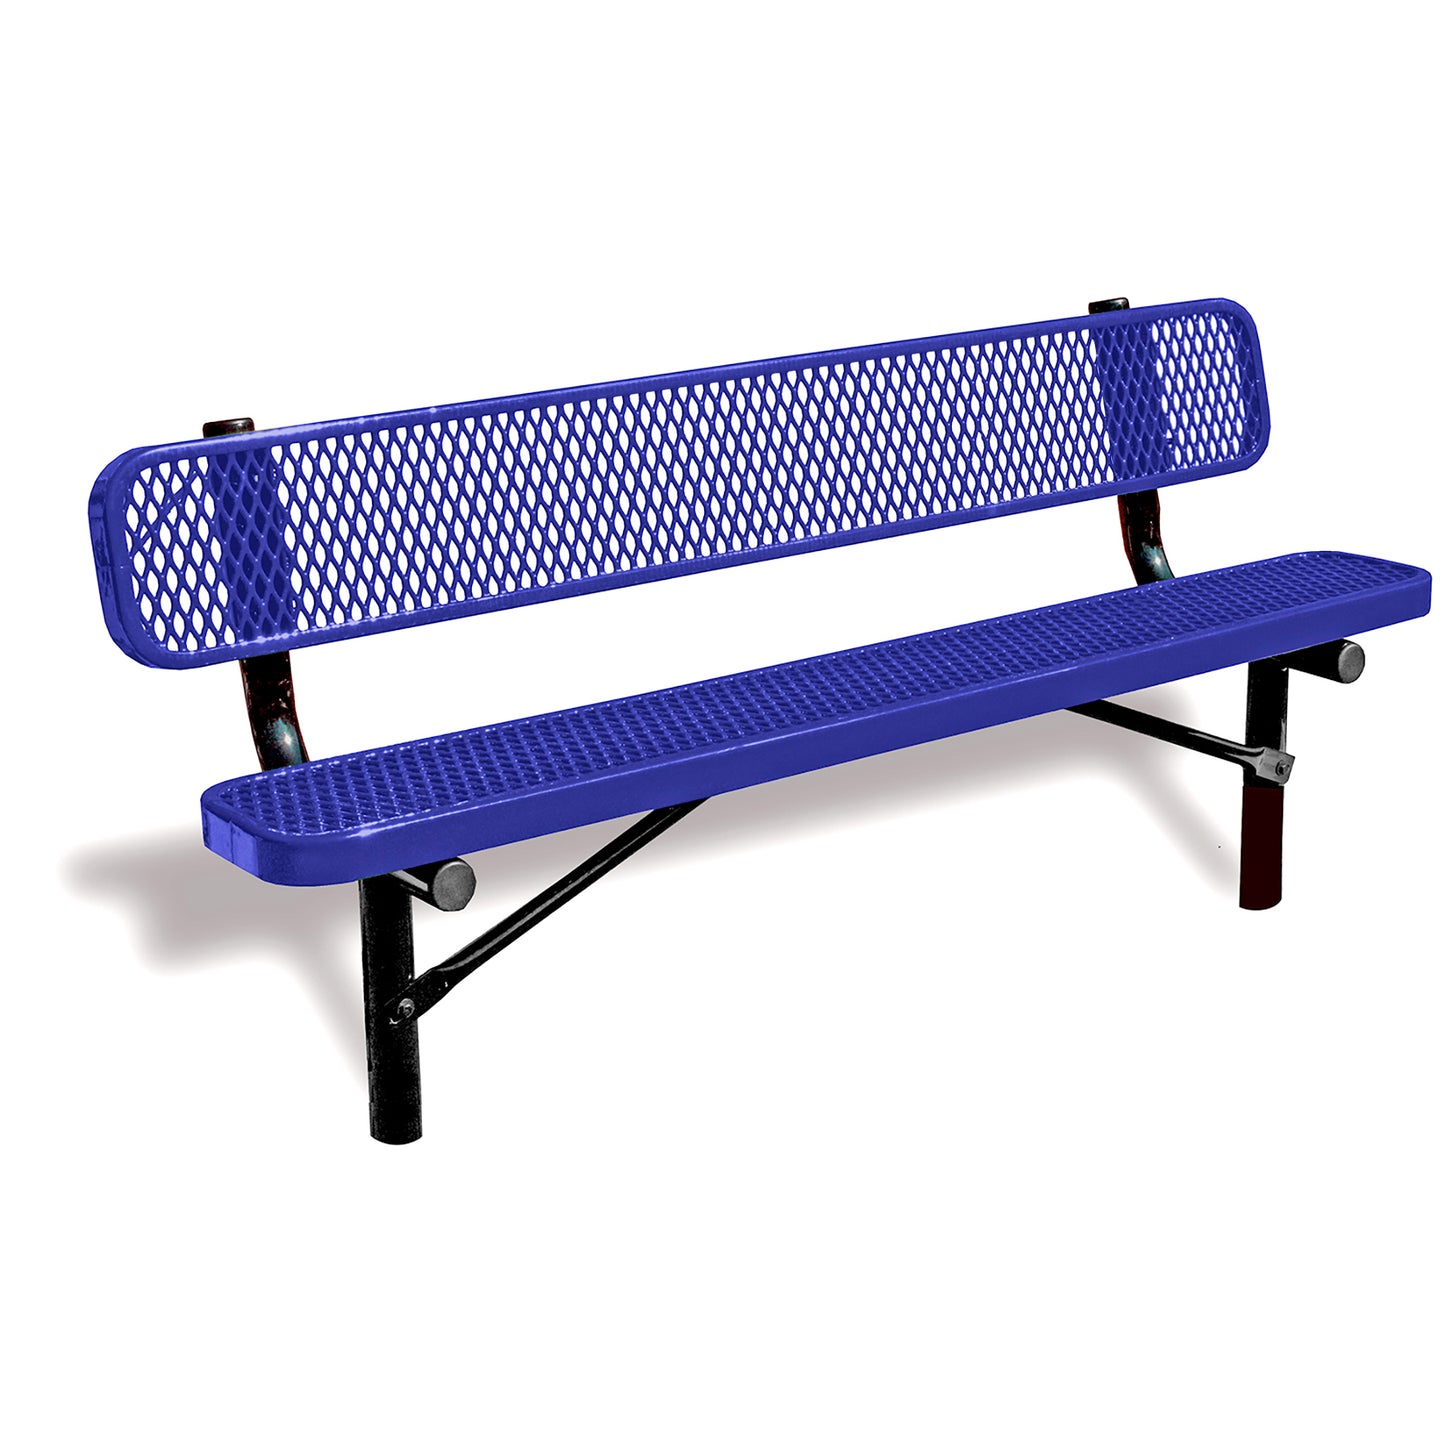 Park Bench with Back Rest